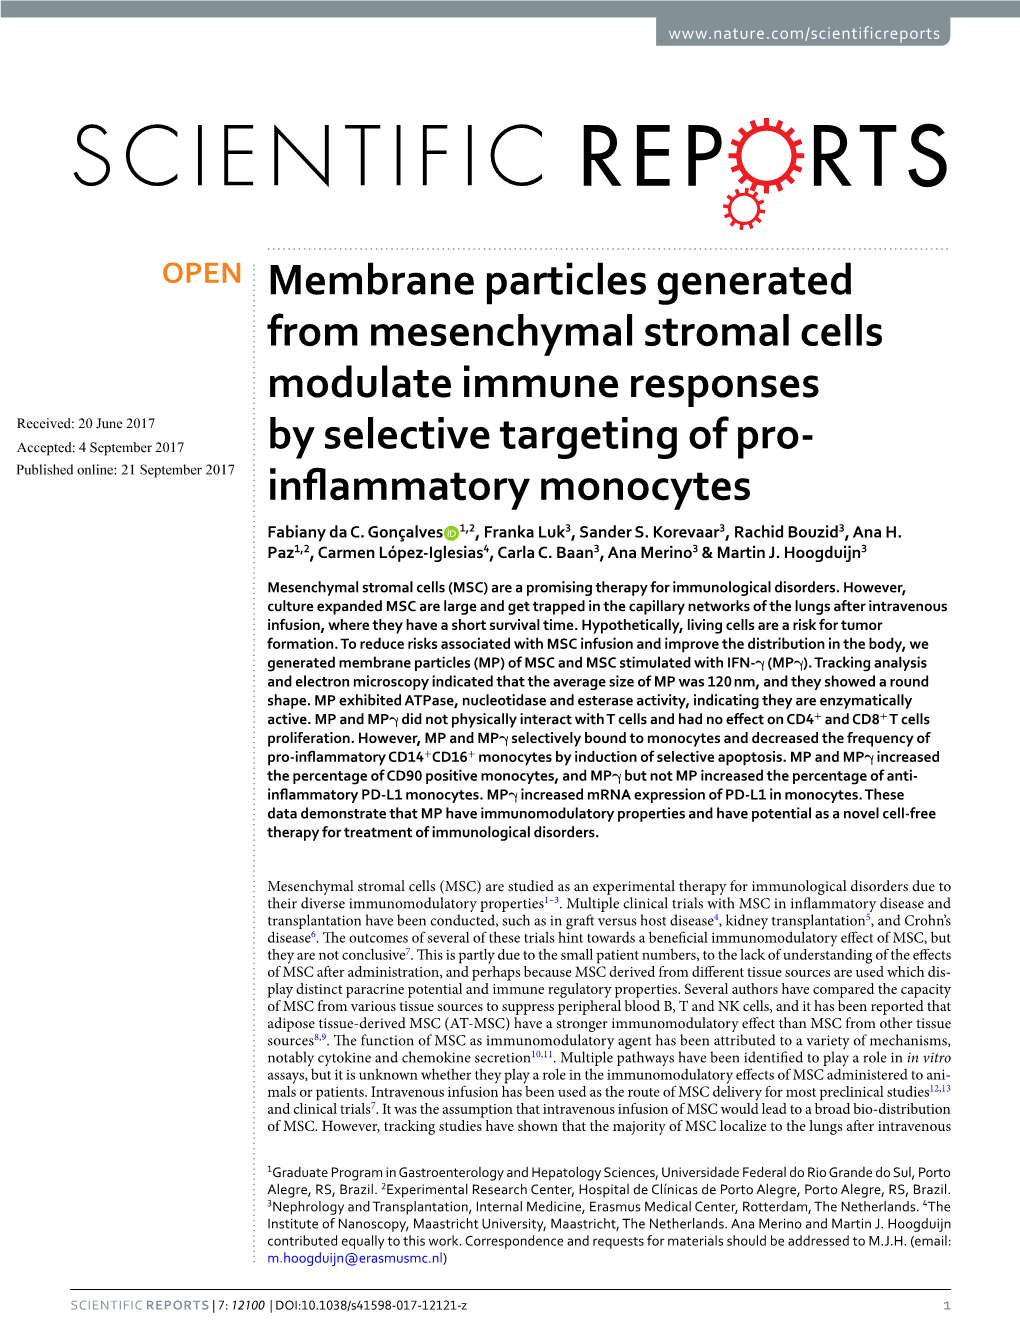 Membrane Particles Generated from Mesenchymal Stromal Cells